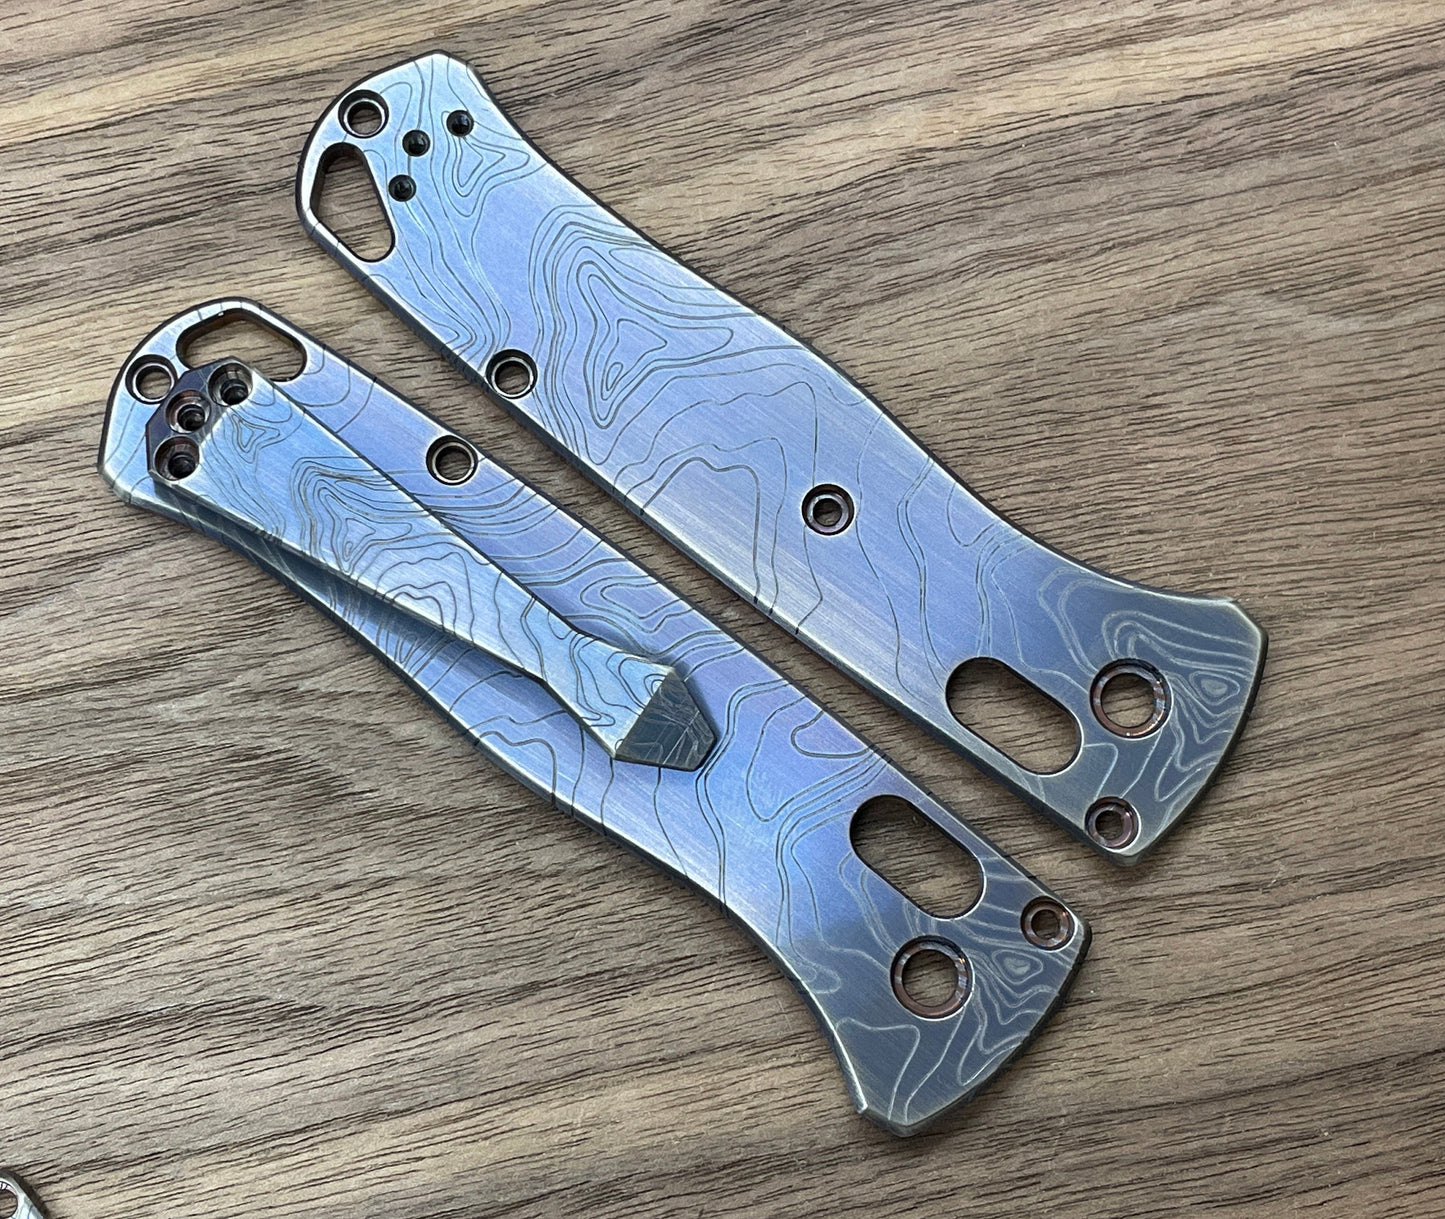 TOPO Blue Ano Brushed Dmd Titanium CLIP for most Benchmade models